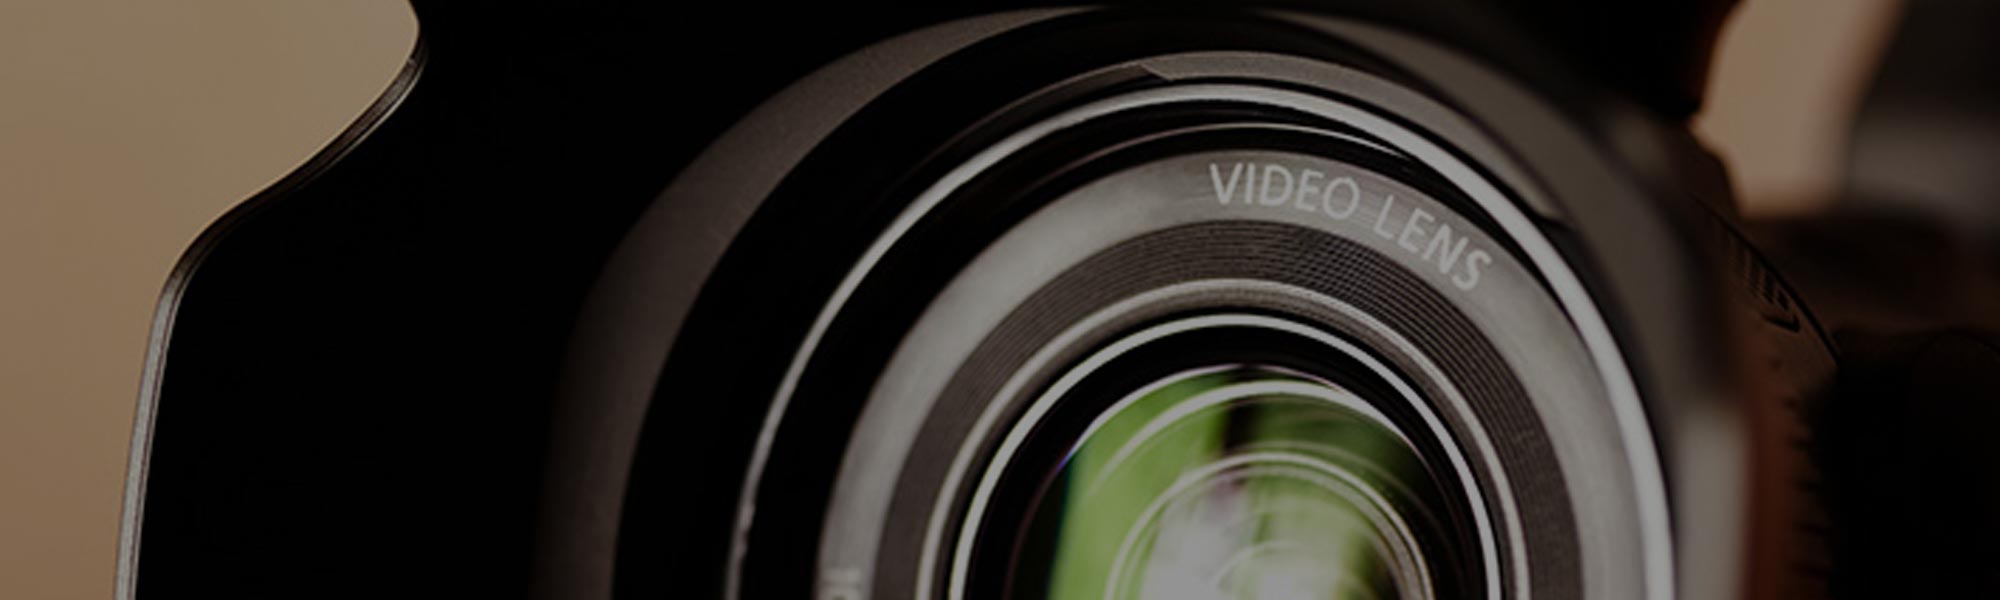 6 Questions To Ask Before Selecting a Video Production Company